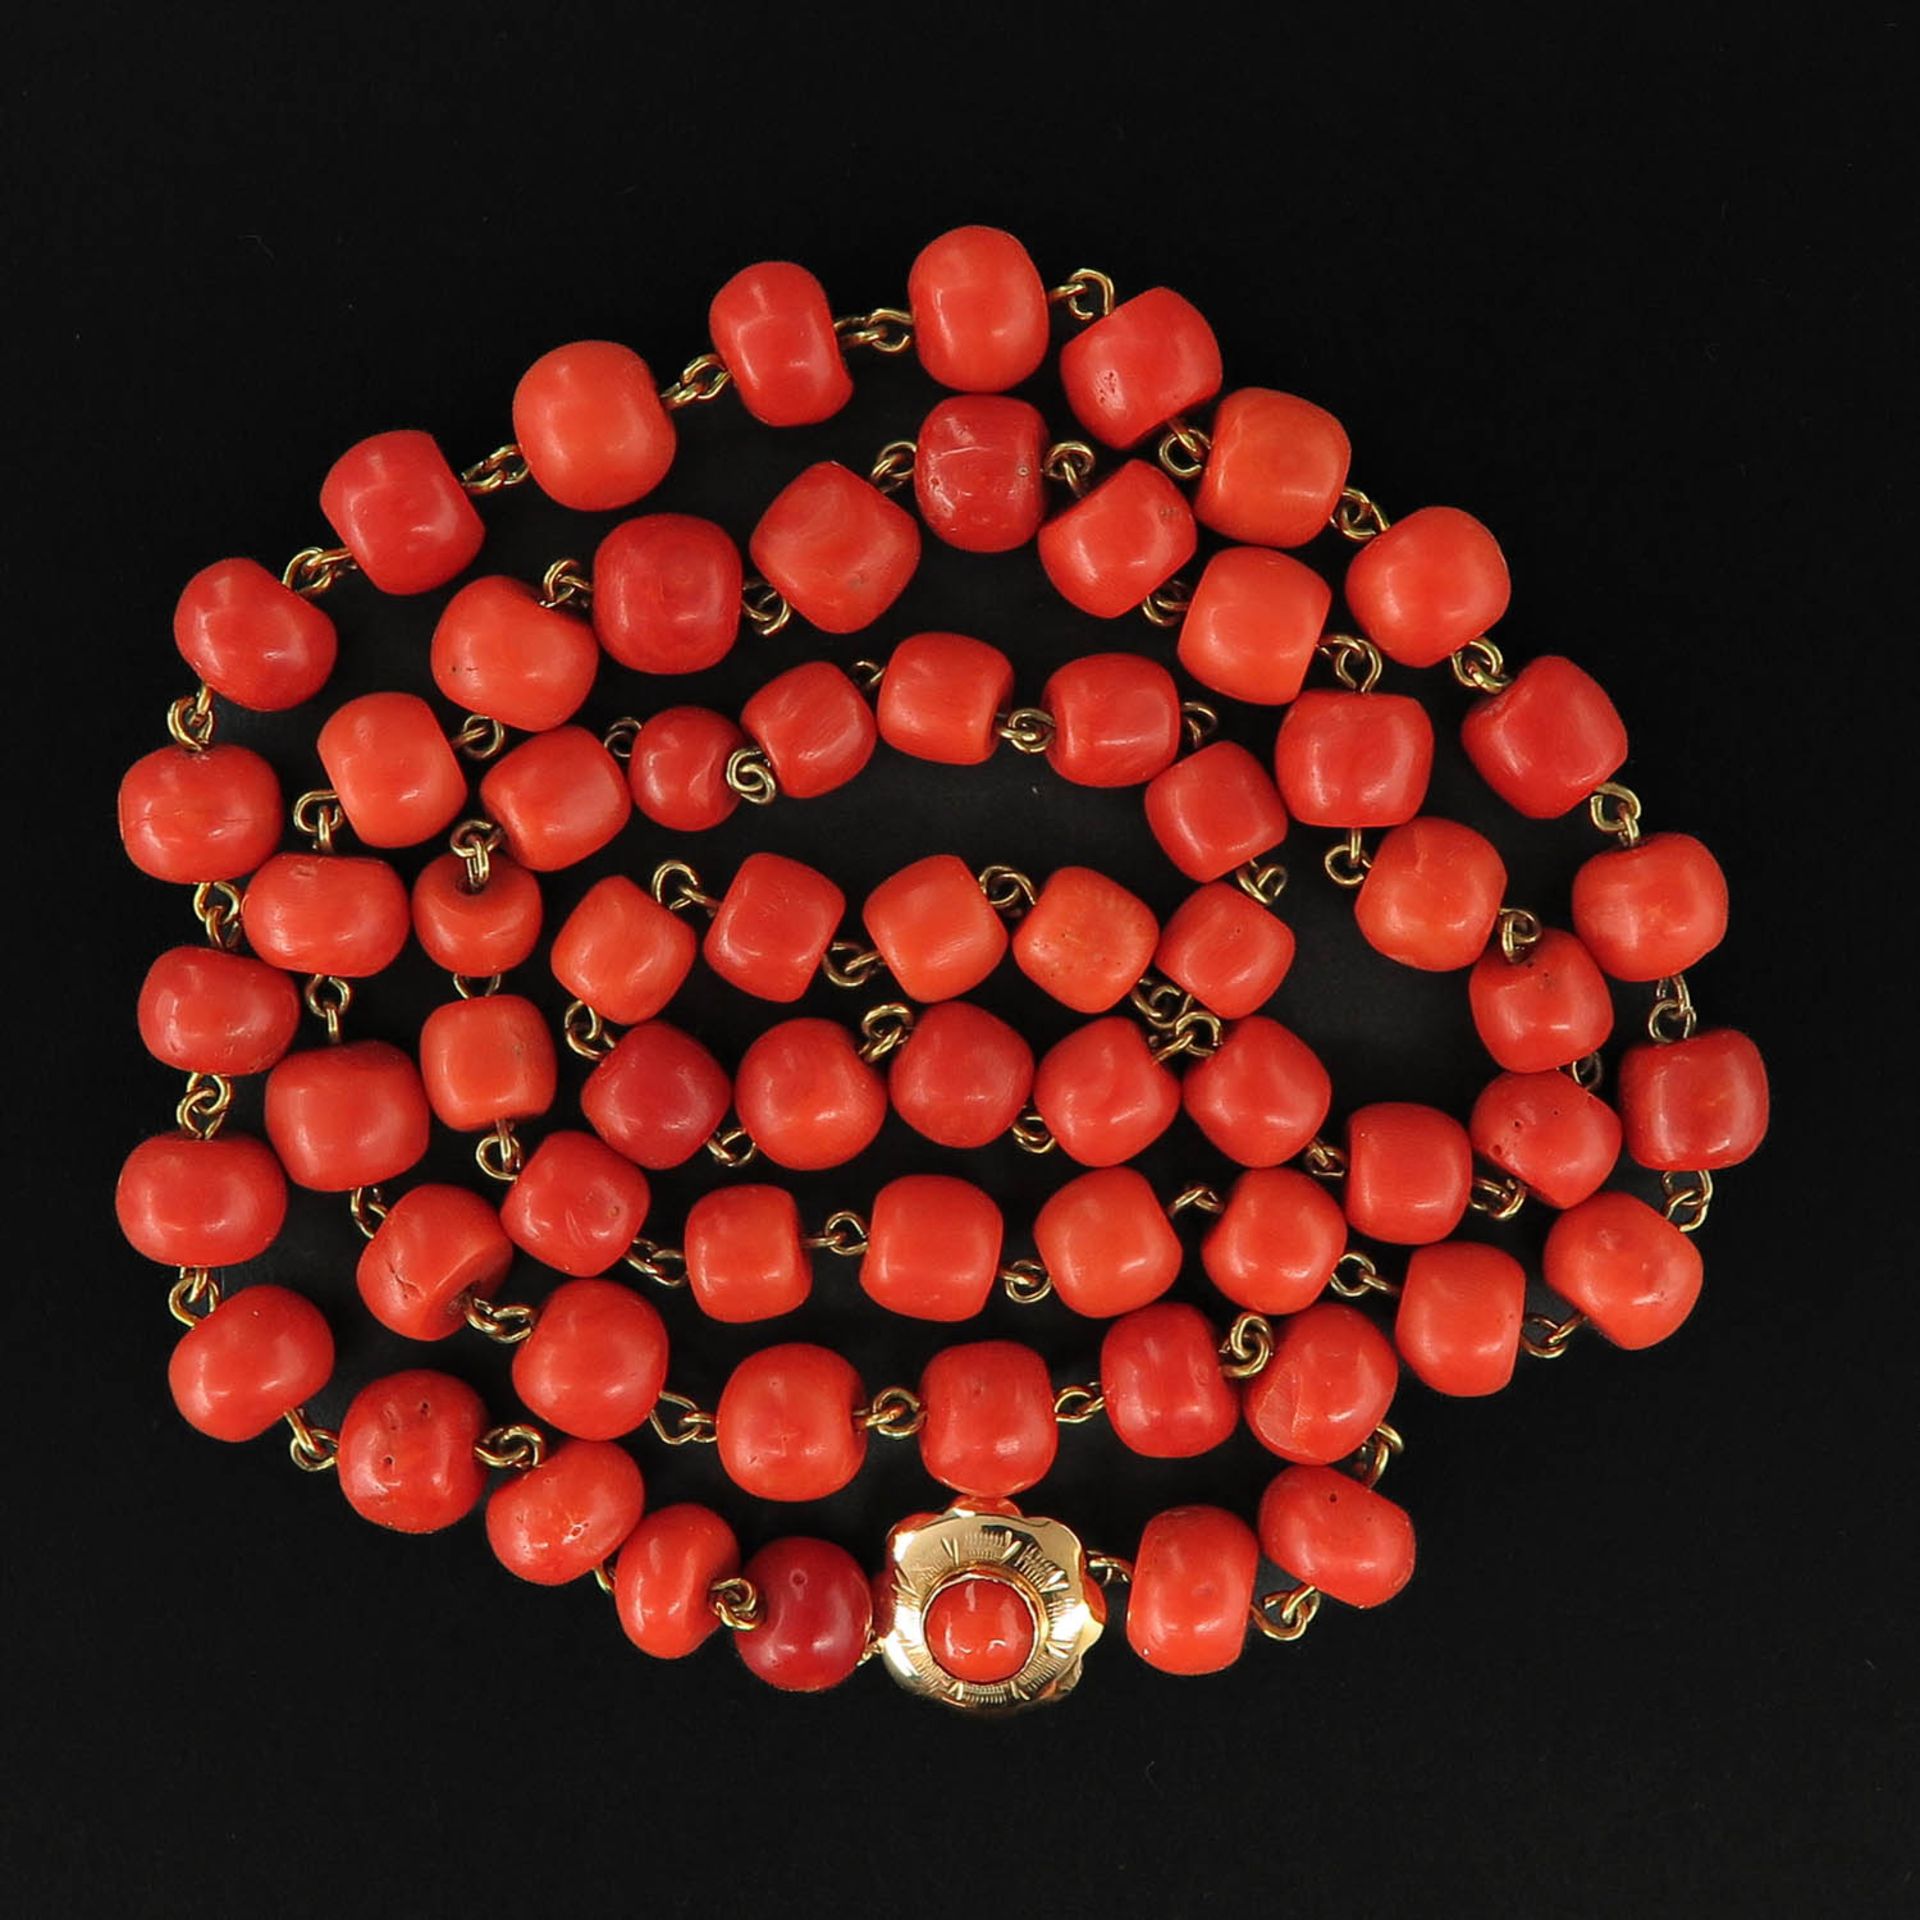 A Single Strand 19th Century Red Coral Necklace - Image 3 of 5